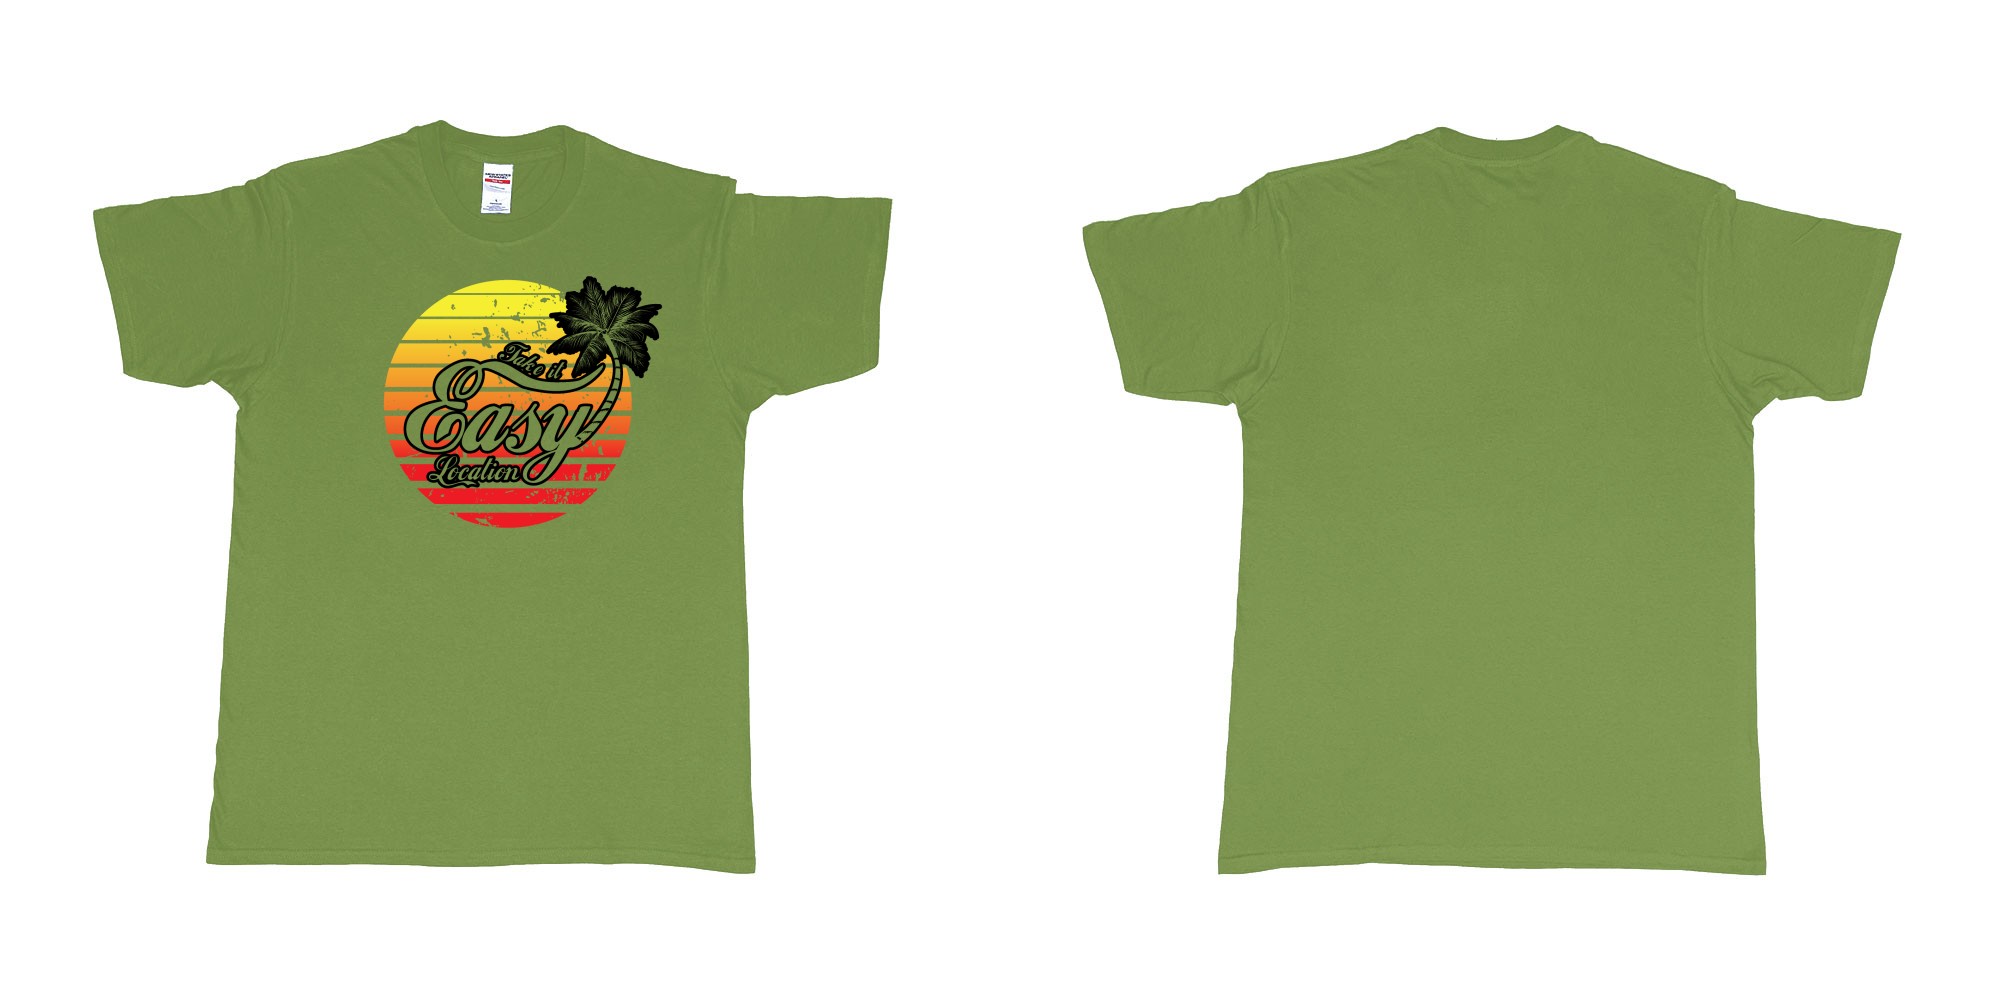 Custom tshirt design take is easy own location easy tee bali custom text printing in fabric color military-green choice your own text made in Bali by The Pirate Way